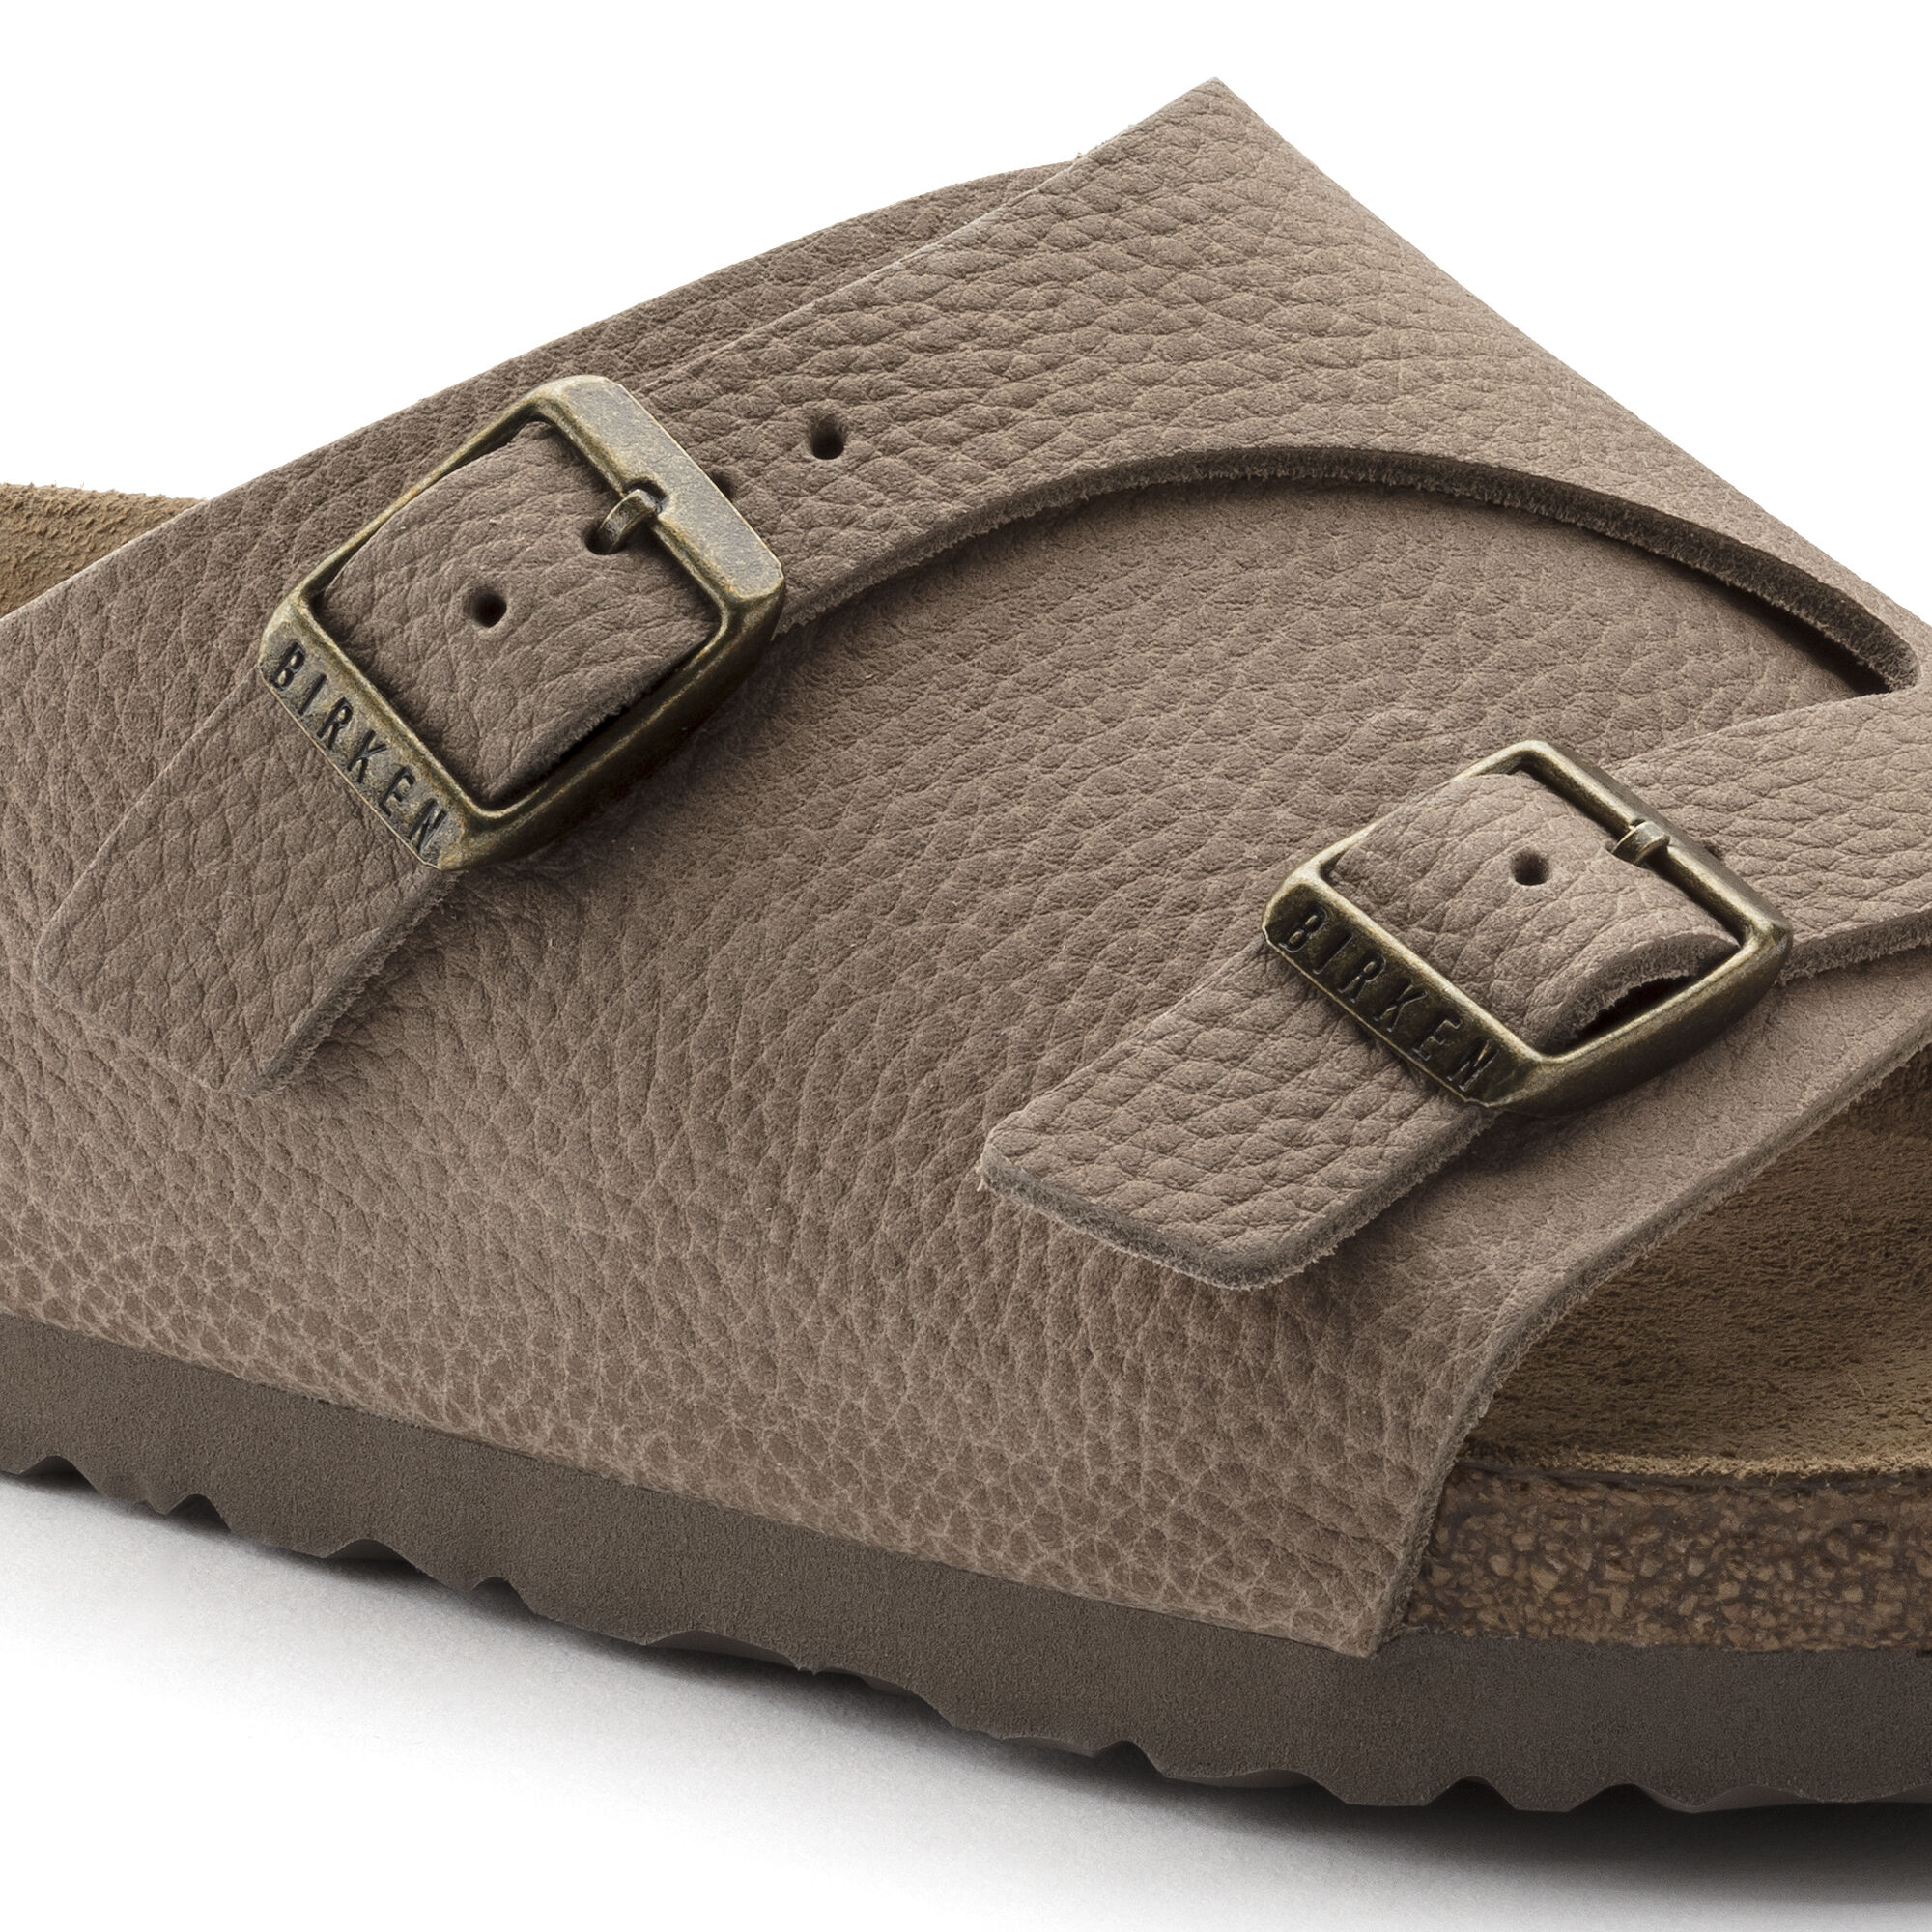 Zürich Soft Footbed / チューリッヒ ソフトフットベッド Real Leather